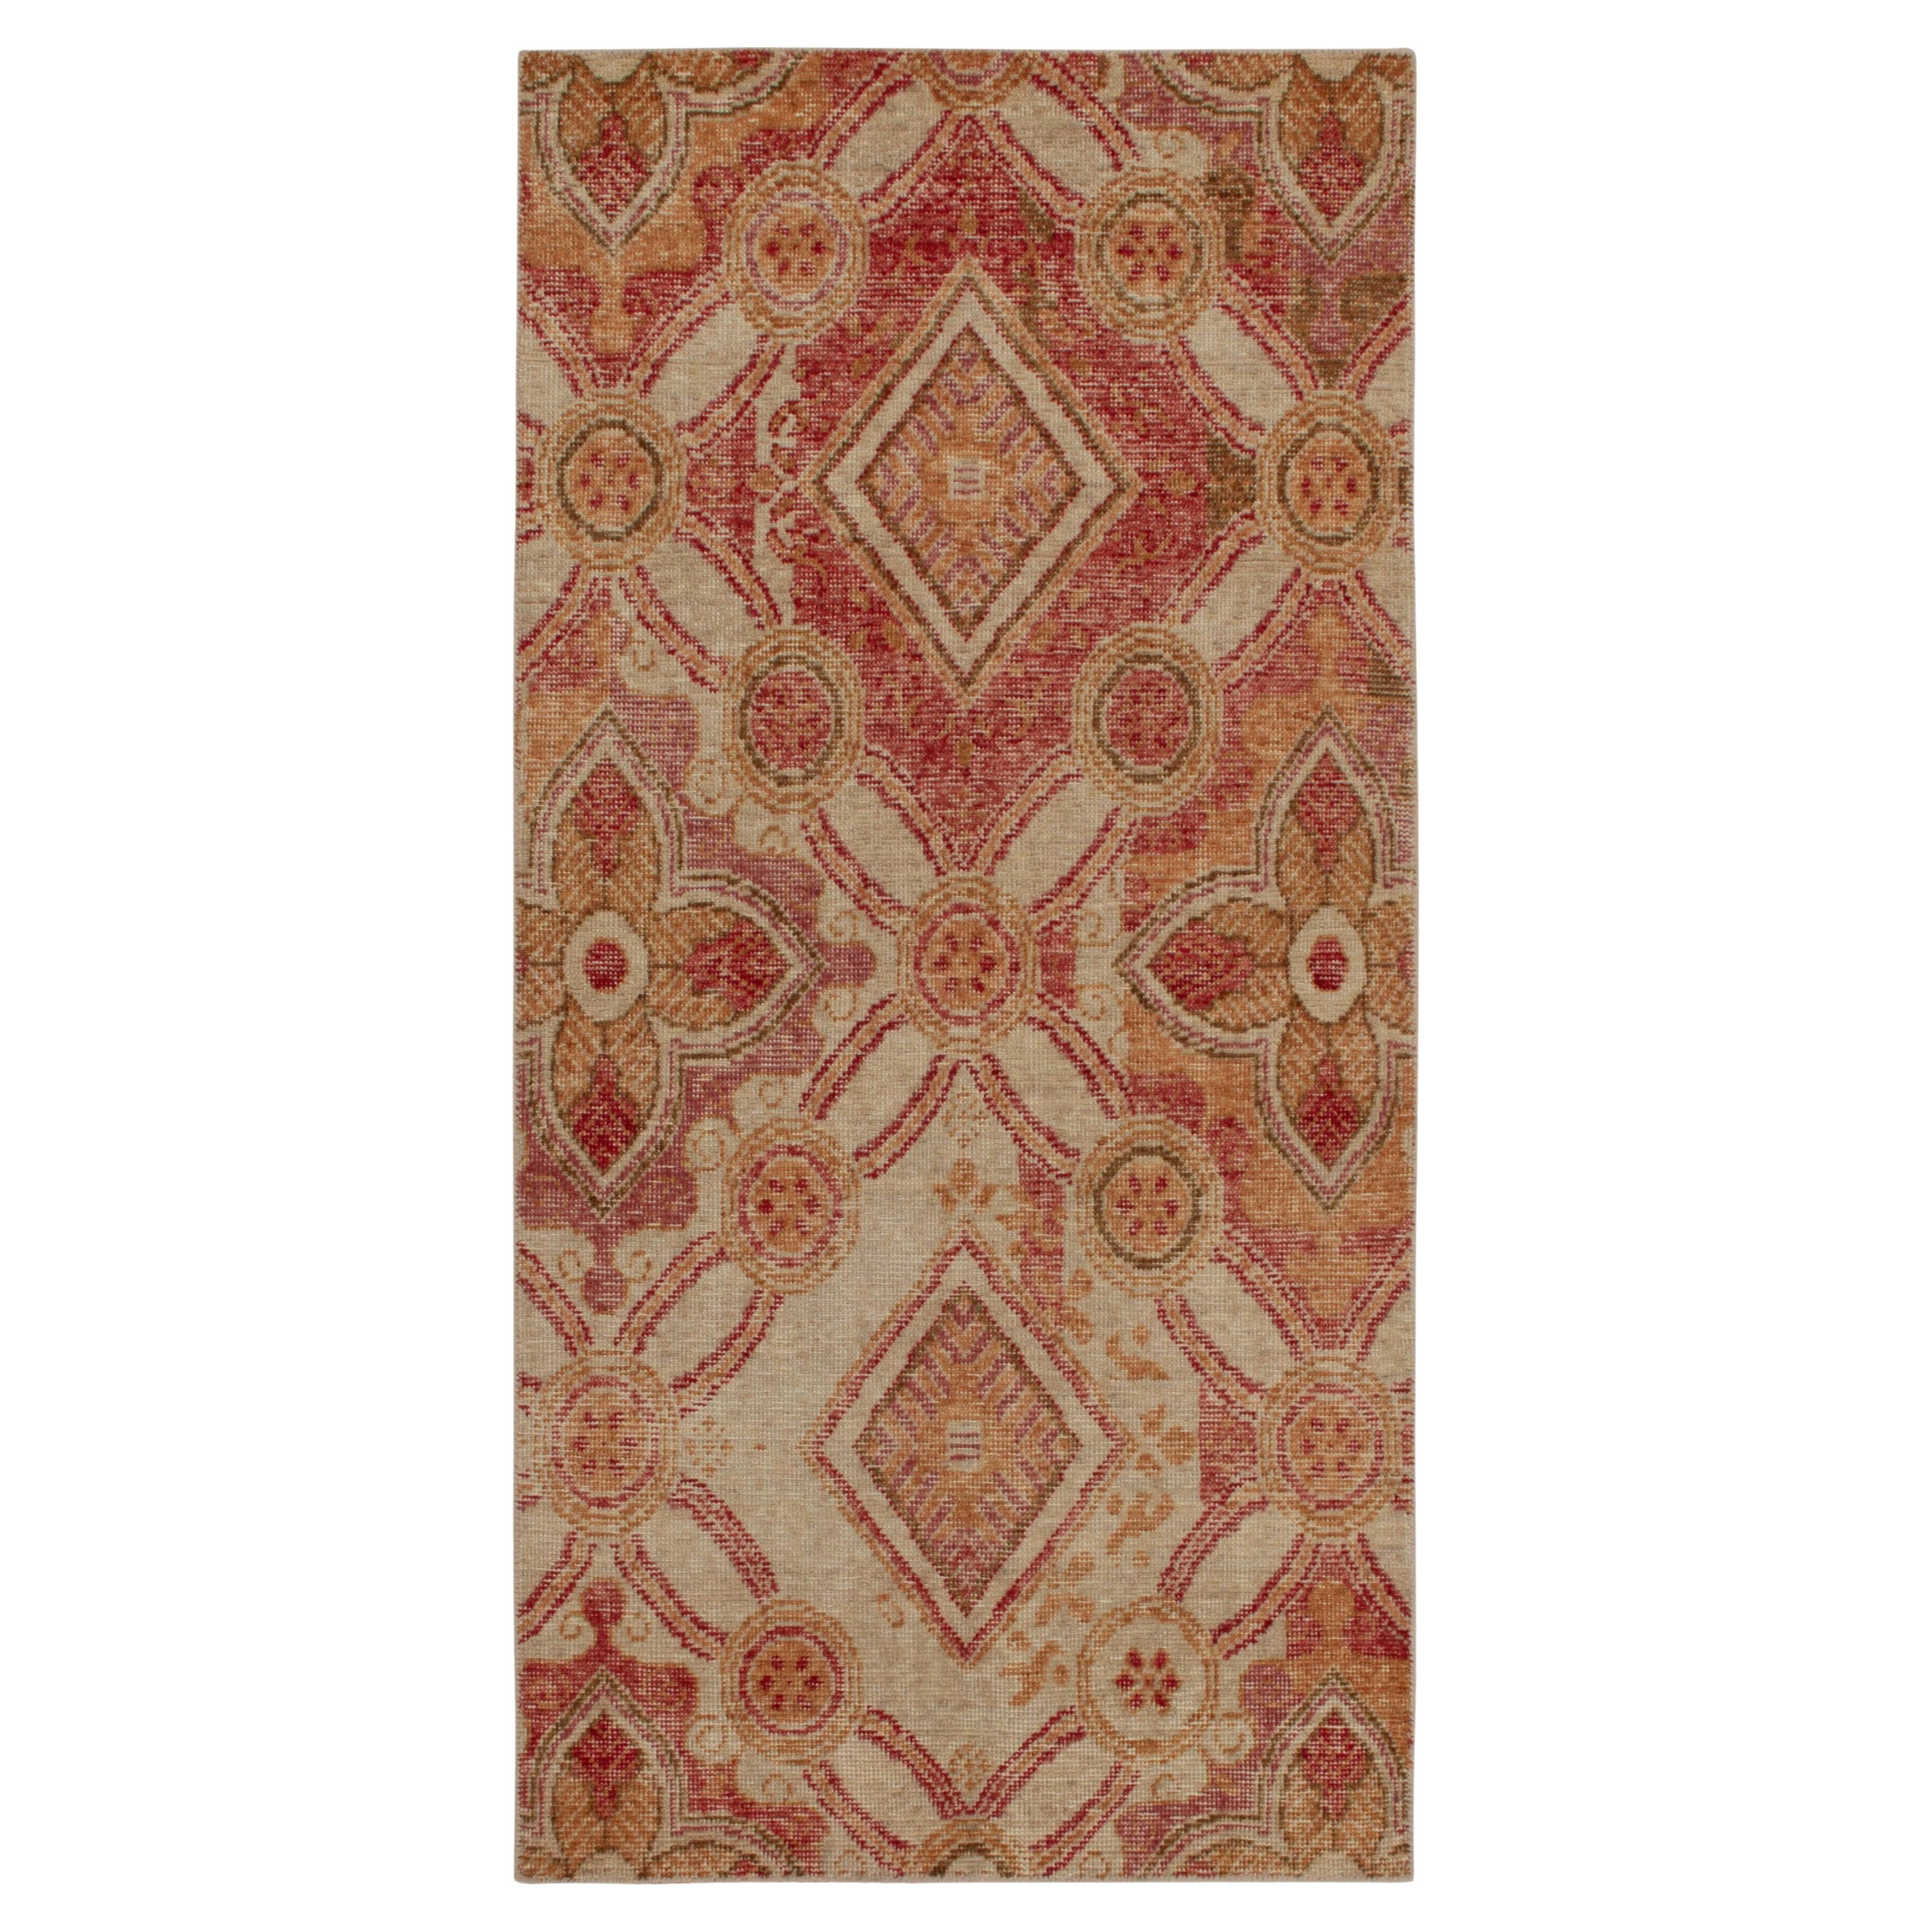 Tapis & Kilim's Distressed Style Runner in Red, Gold and Beige-Brown Trellis